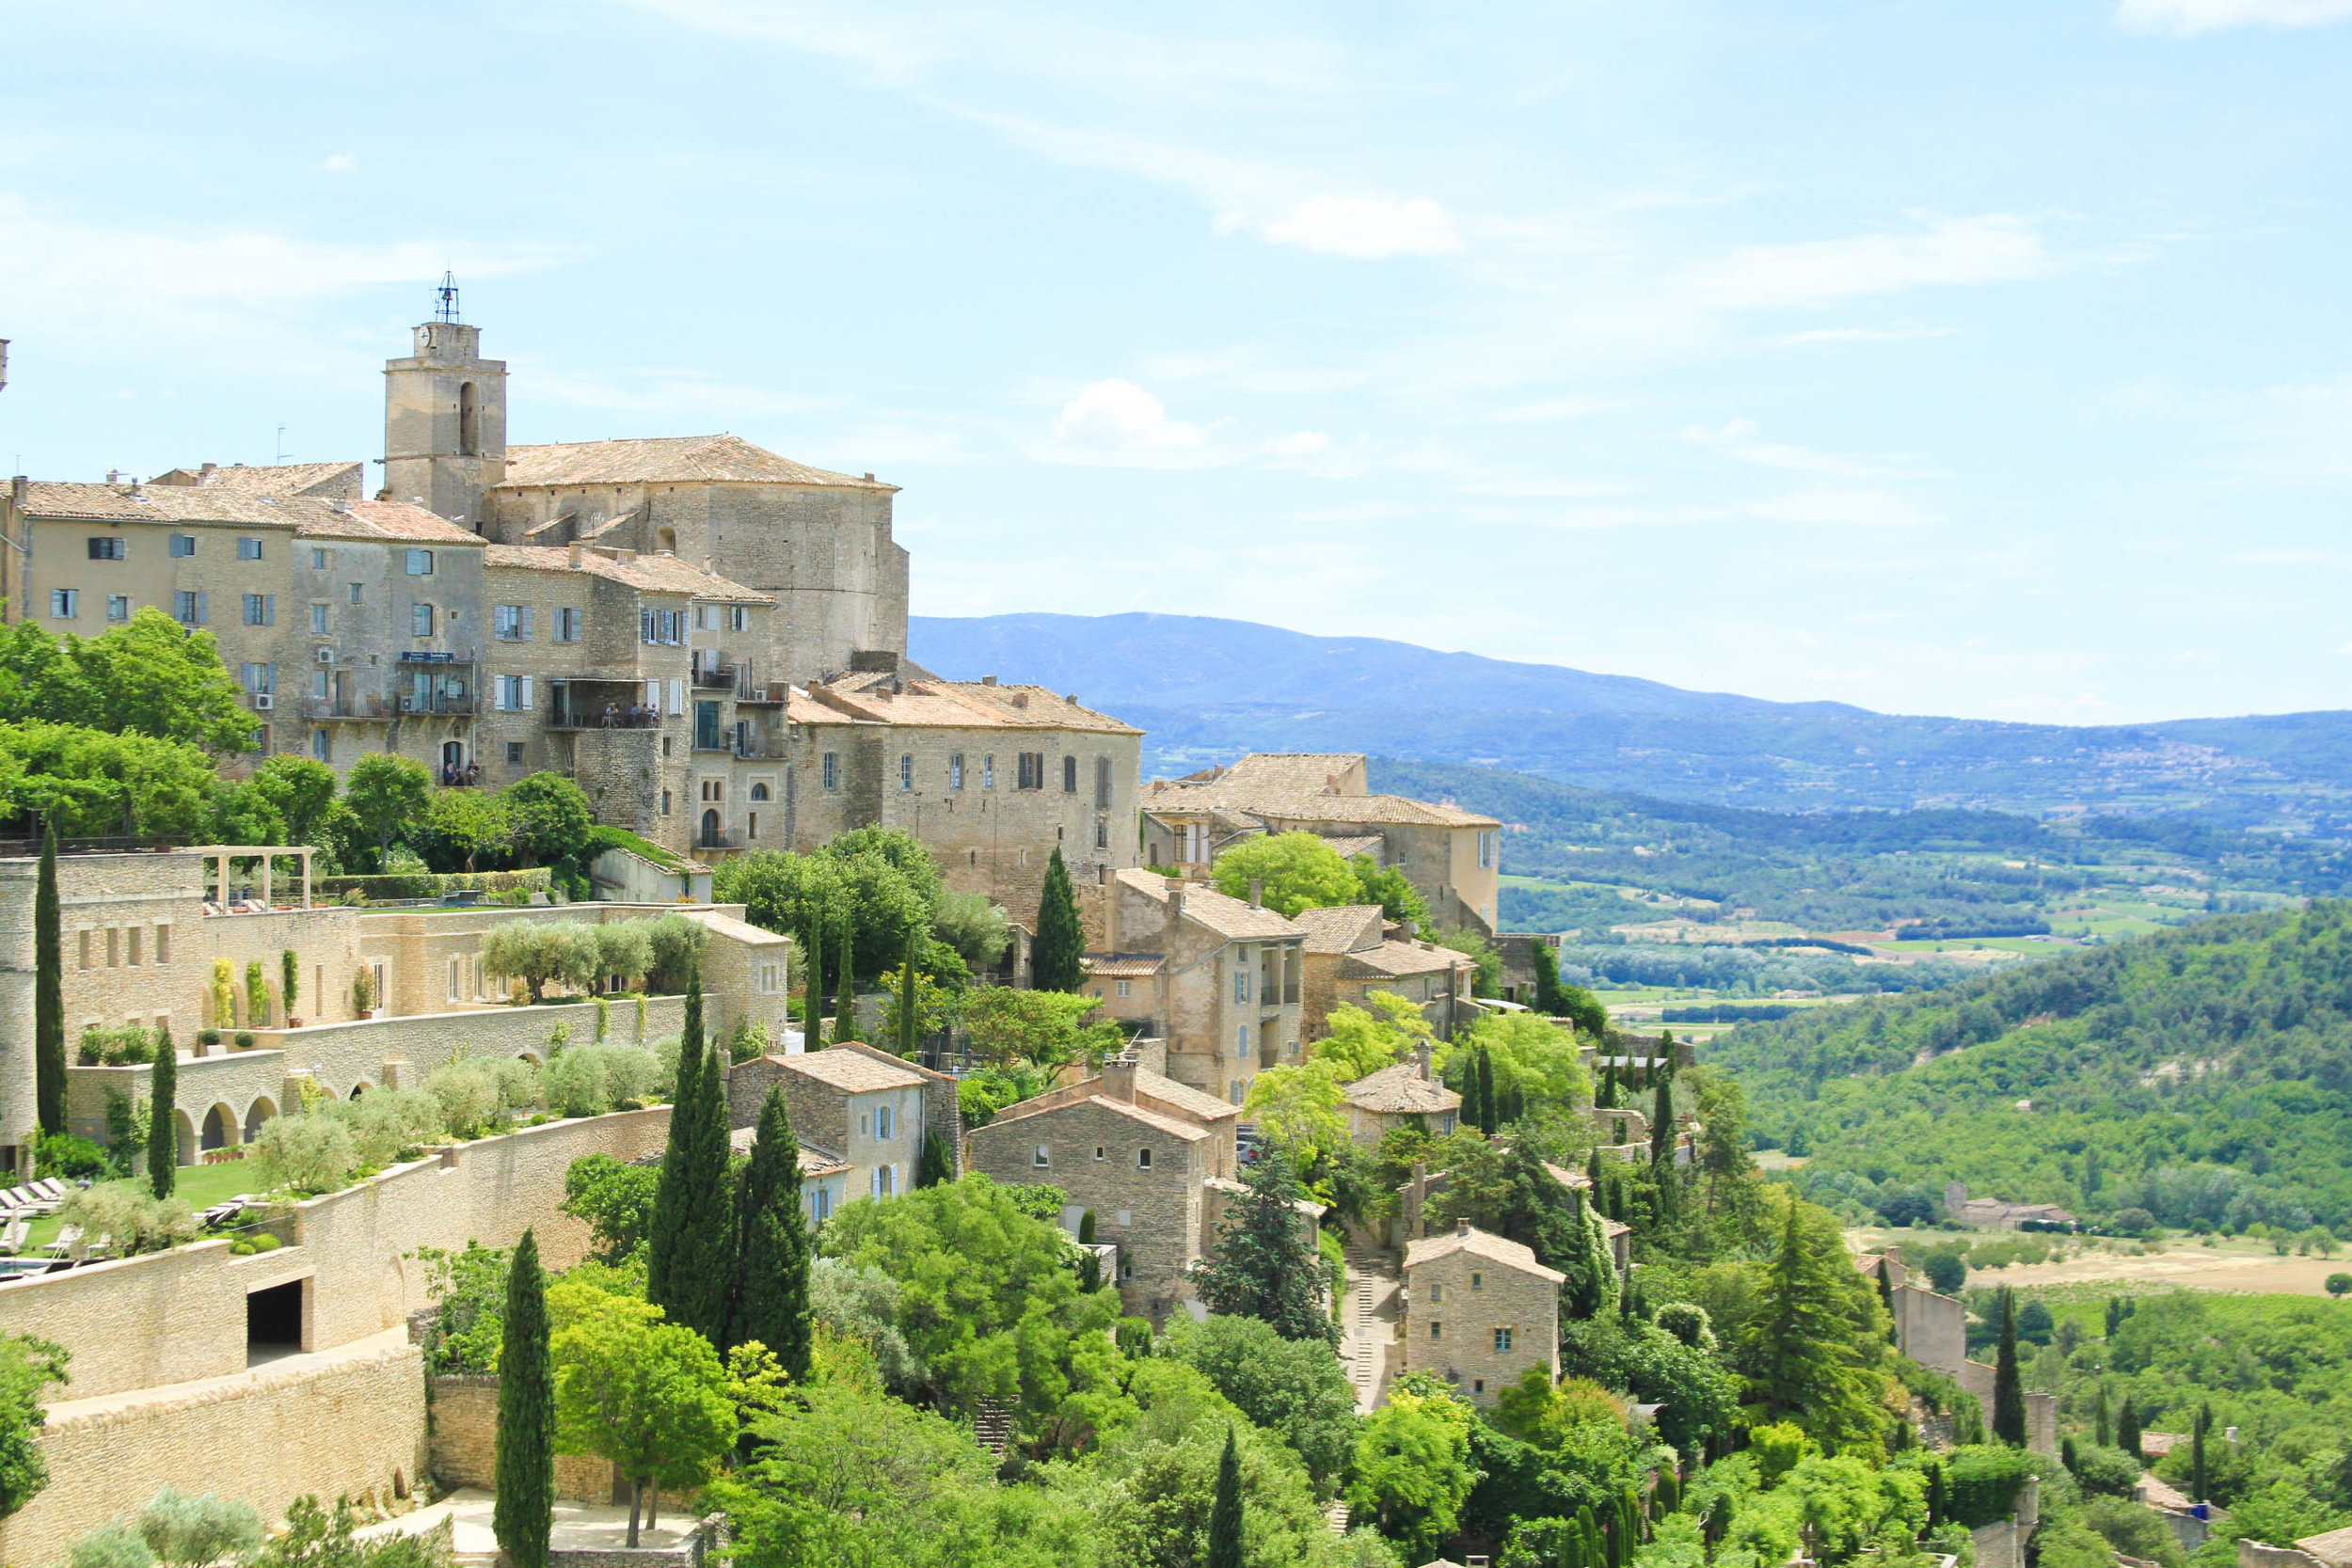 "Possibly the most well-known town of the Luberon region, Gordes is a great place to start exploring Provence...." | #mfrancisdesigntravels